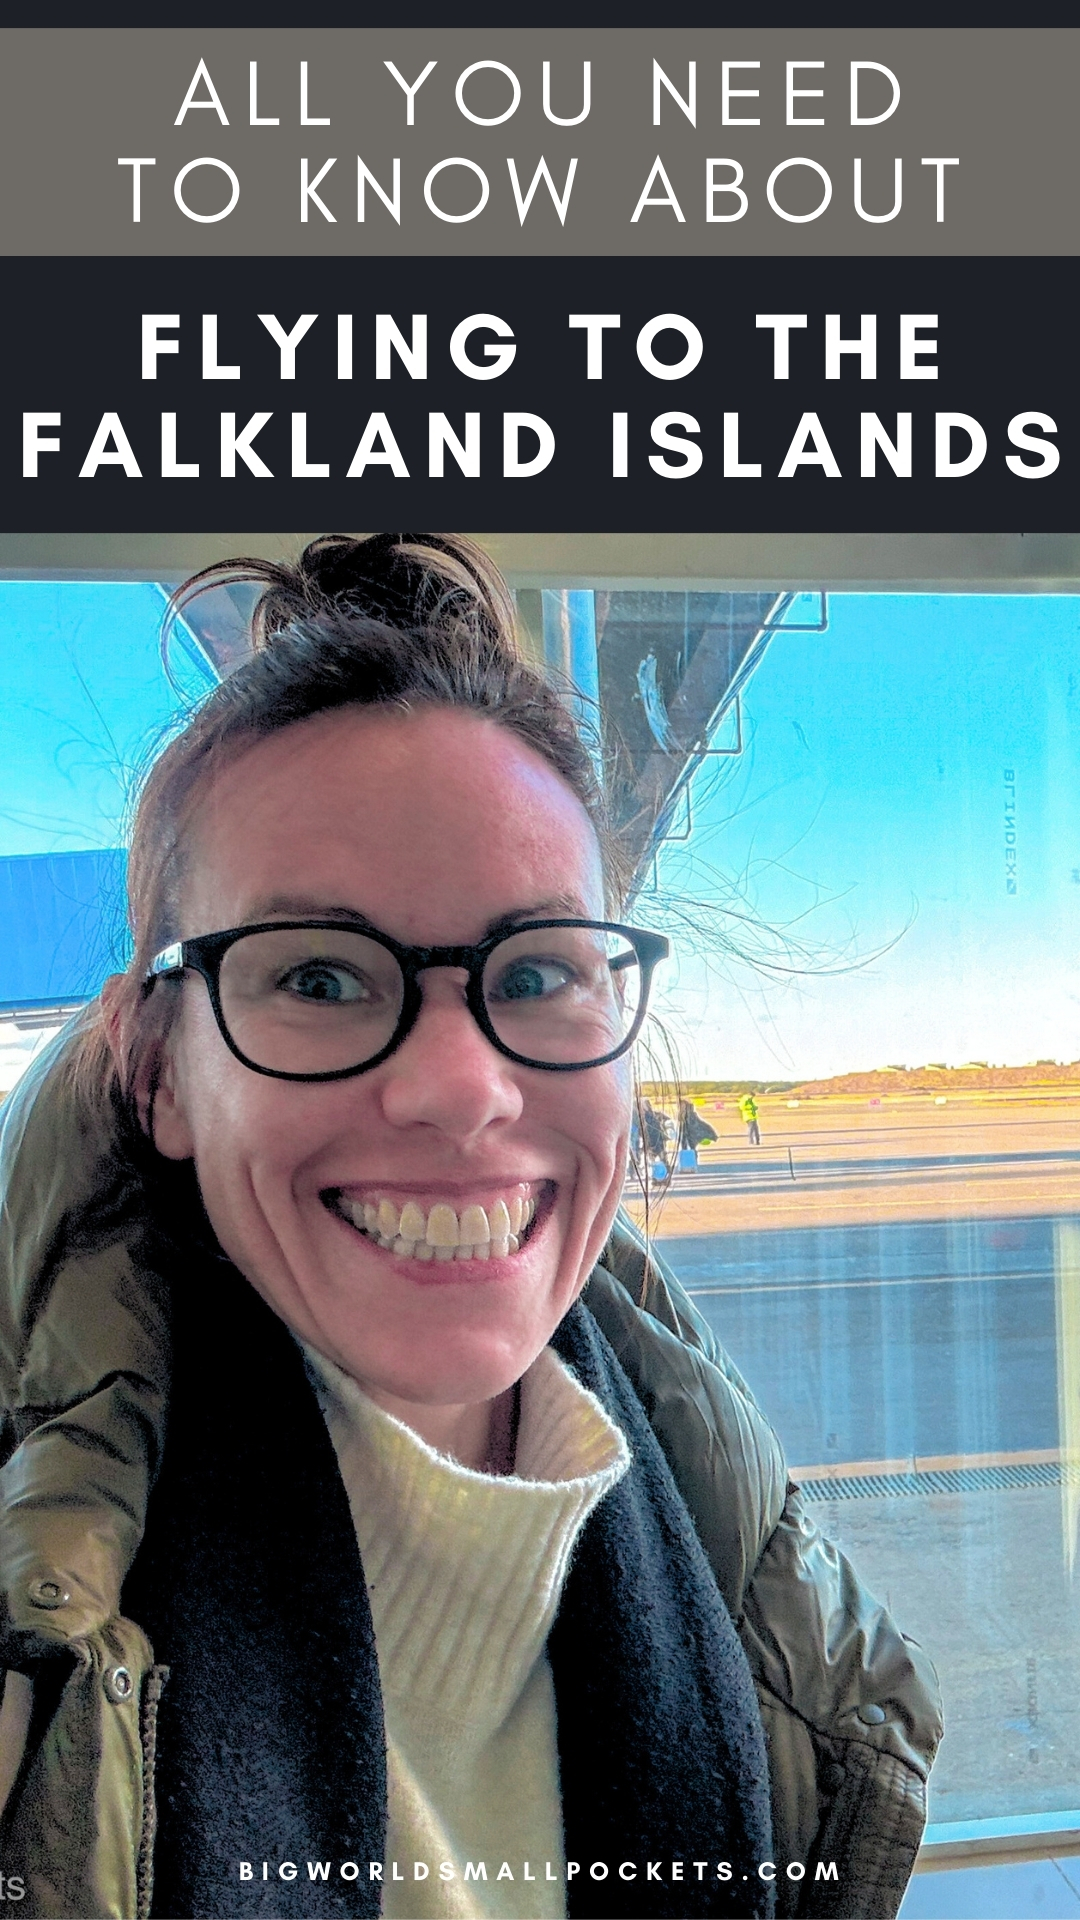 Flying to the Falkland Islands All You Need to Know